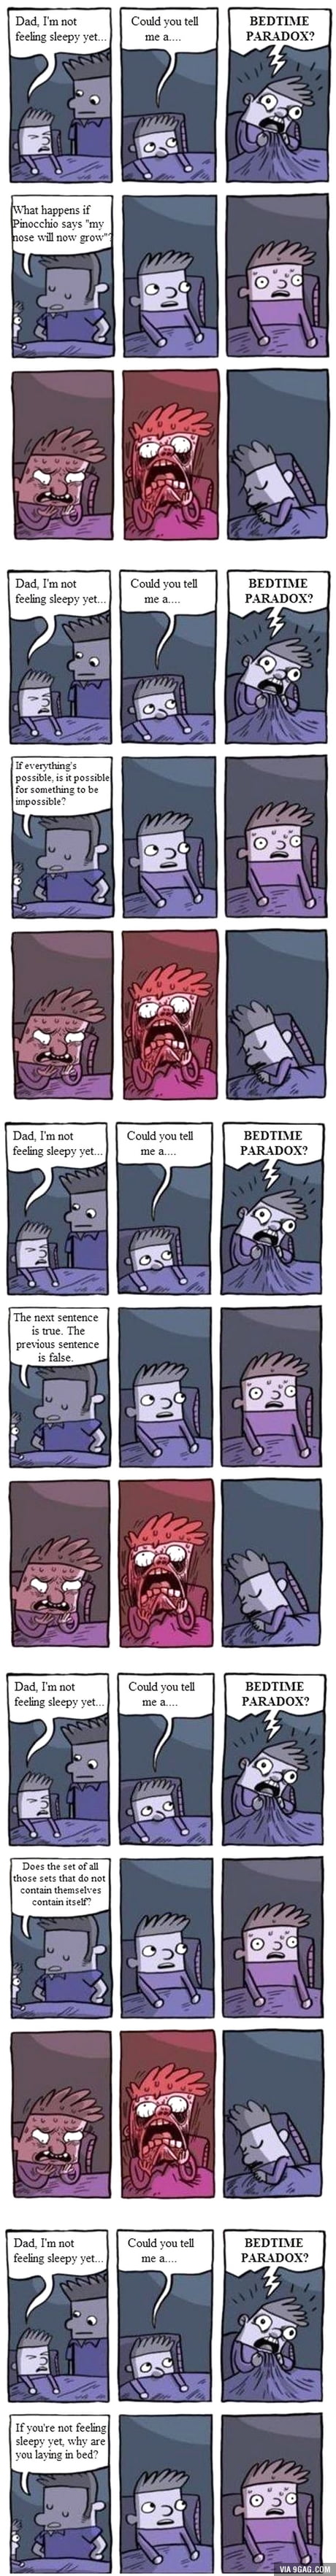 Bedtime Paradox 9gag Paradox because even if you used a different testing framework then the question applies to that framework too and the next and. bedtime paradox 9gag